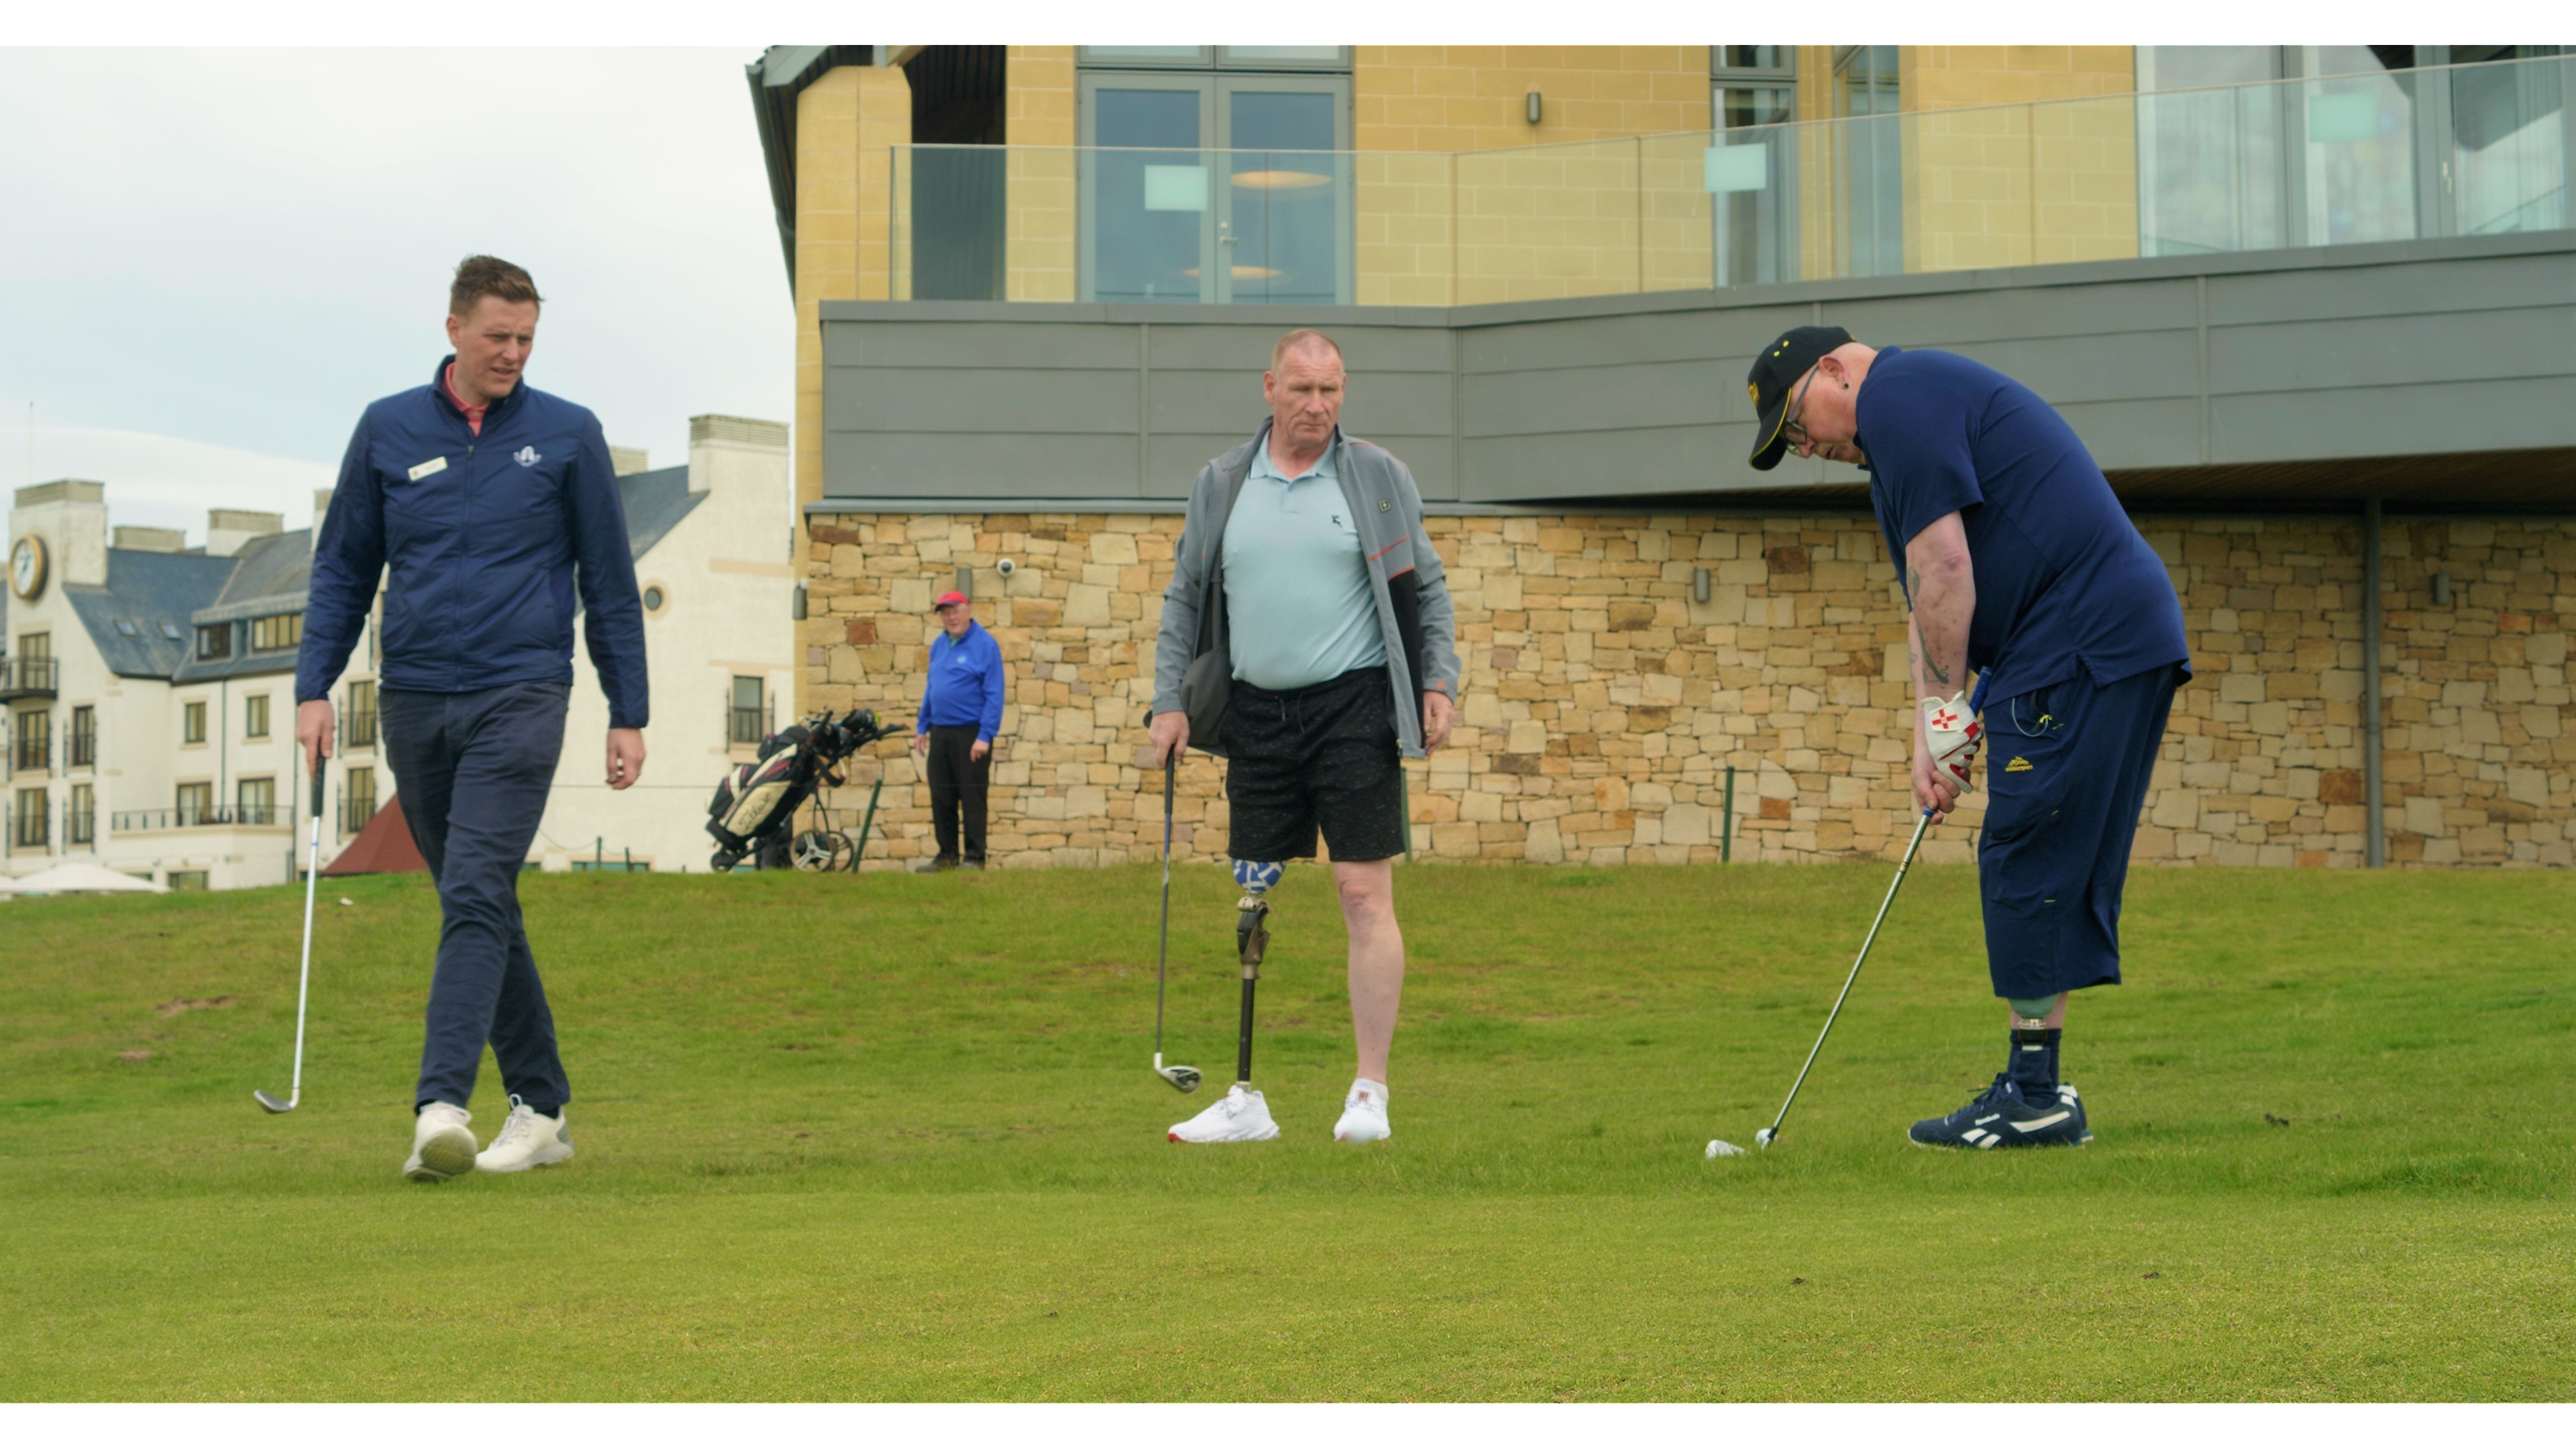 The academic study will investigate the impact of golf participation on quality of life